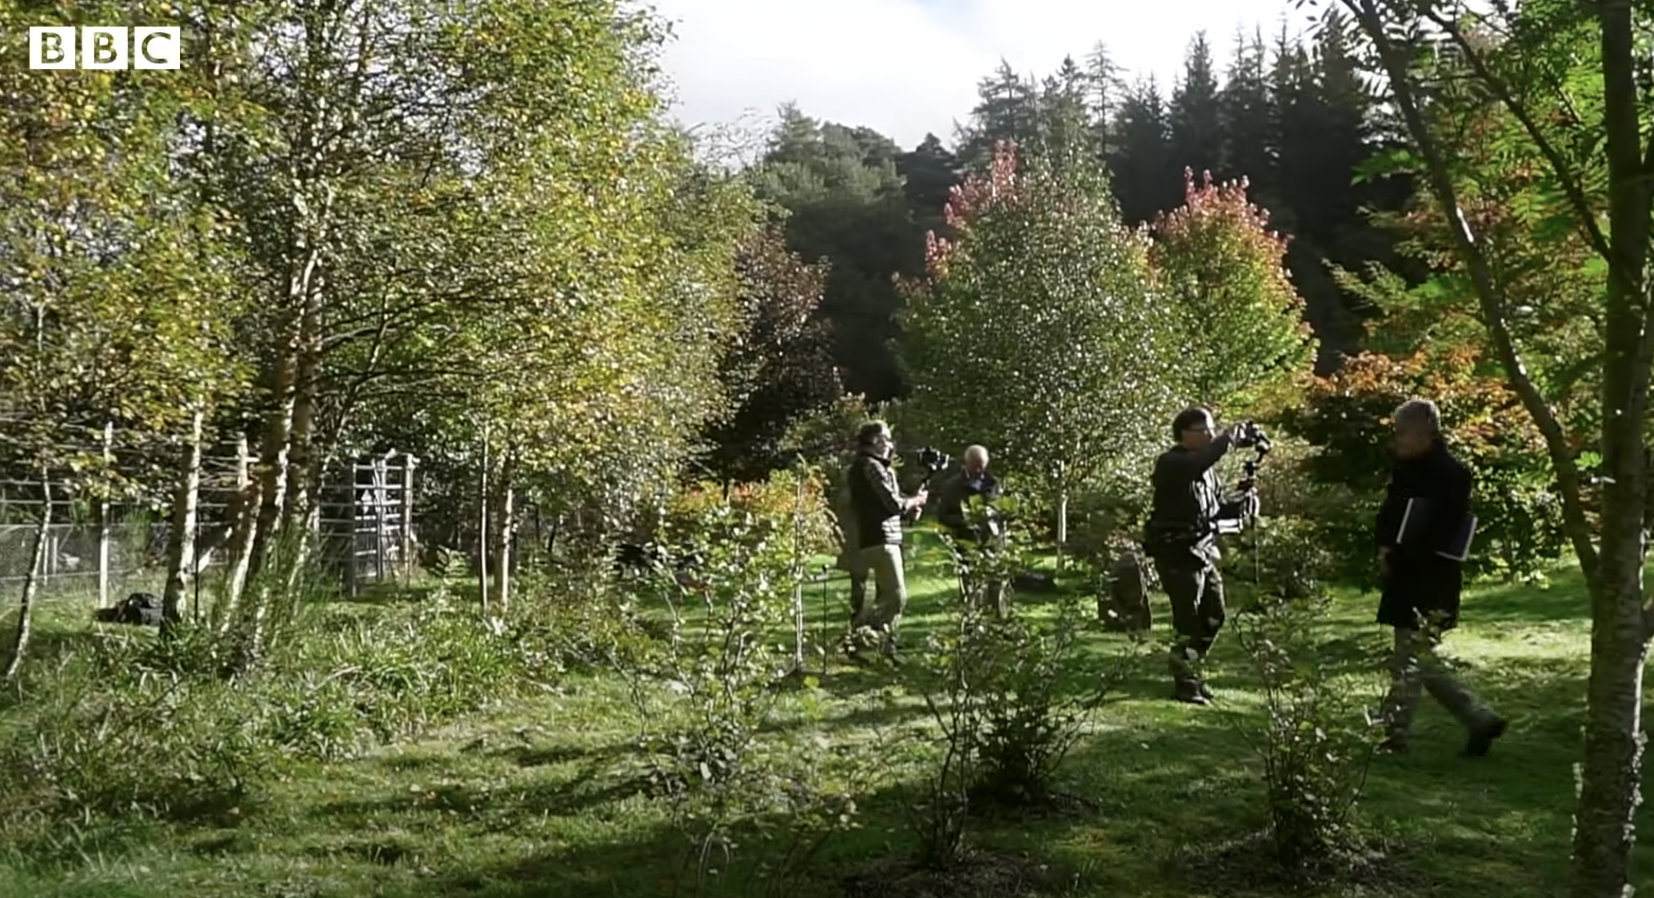 The garden in Balmoral Estate, dated 2022 | Source: YouTube/BBC News